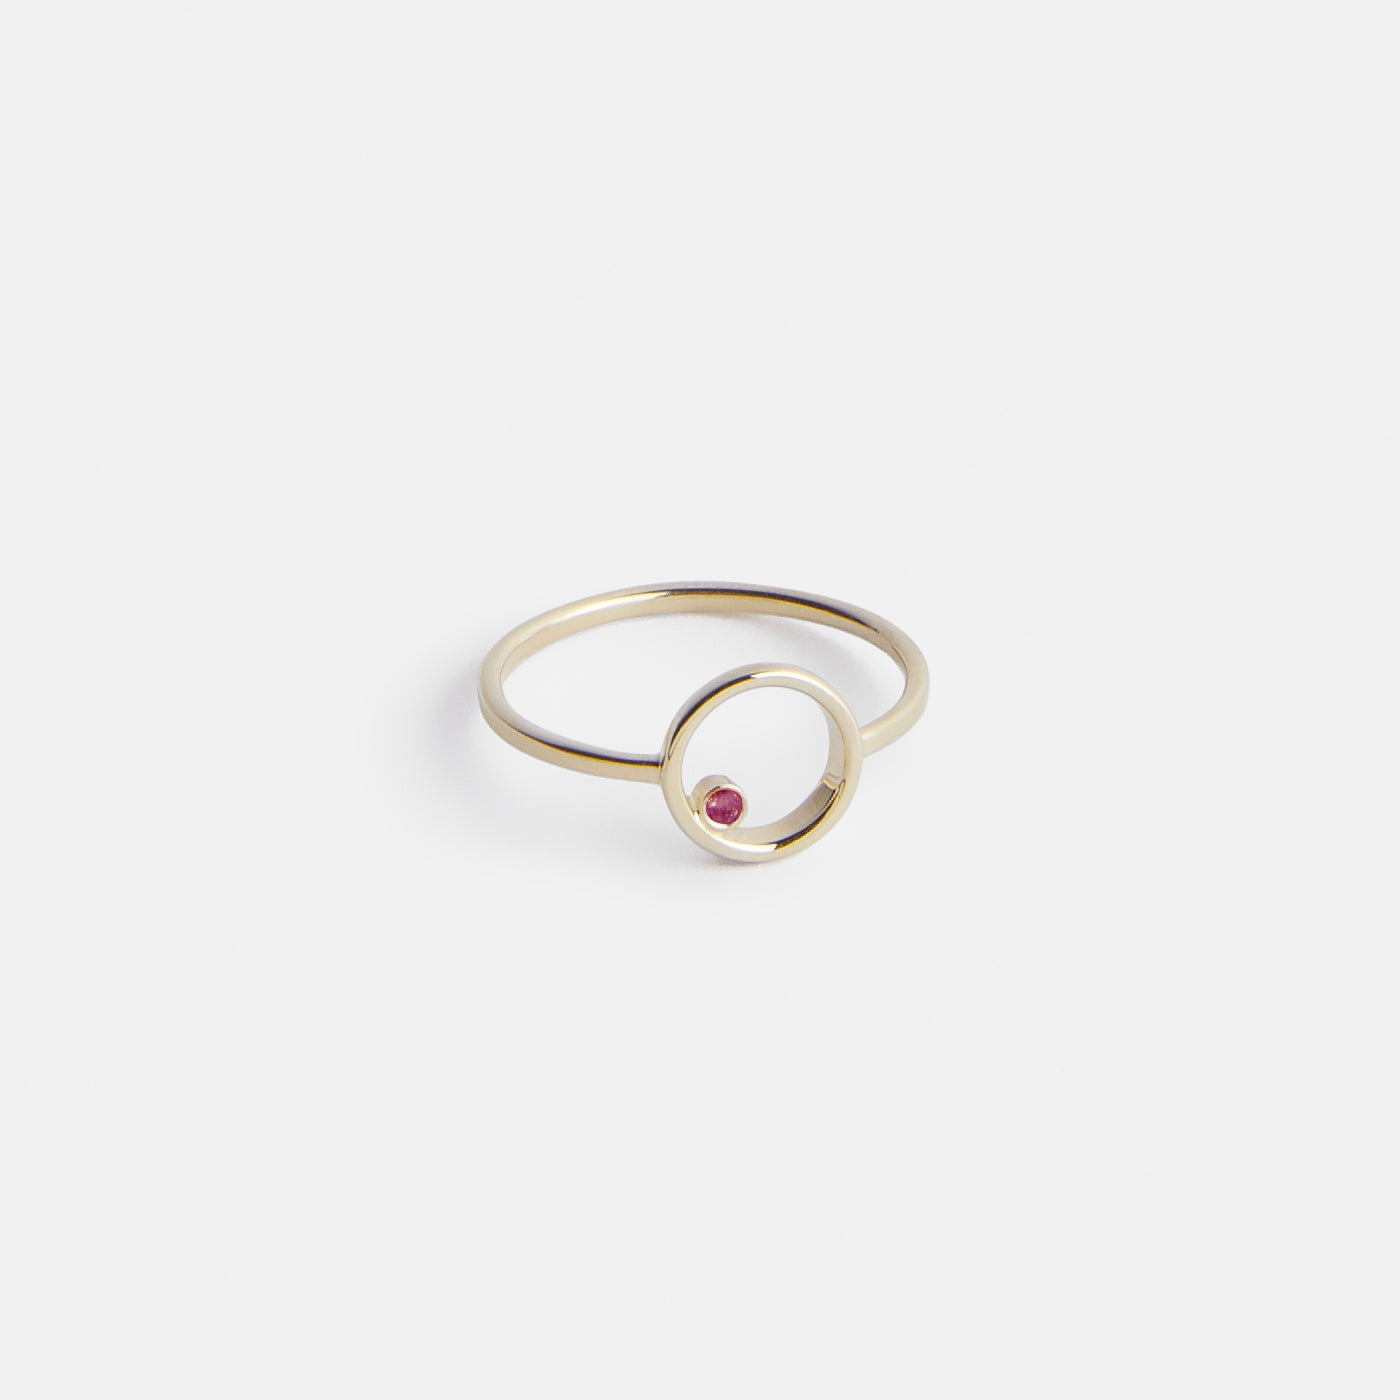 Ila Designer Ring in 14k Gold set with Ruby by SHW Fine Jewelry NYC